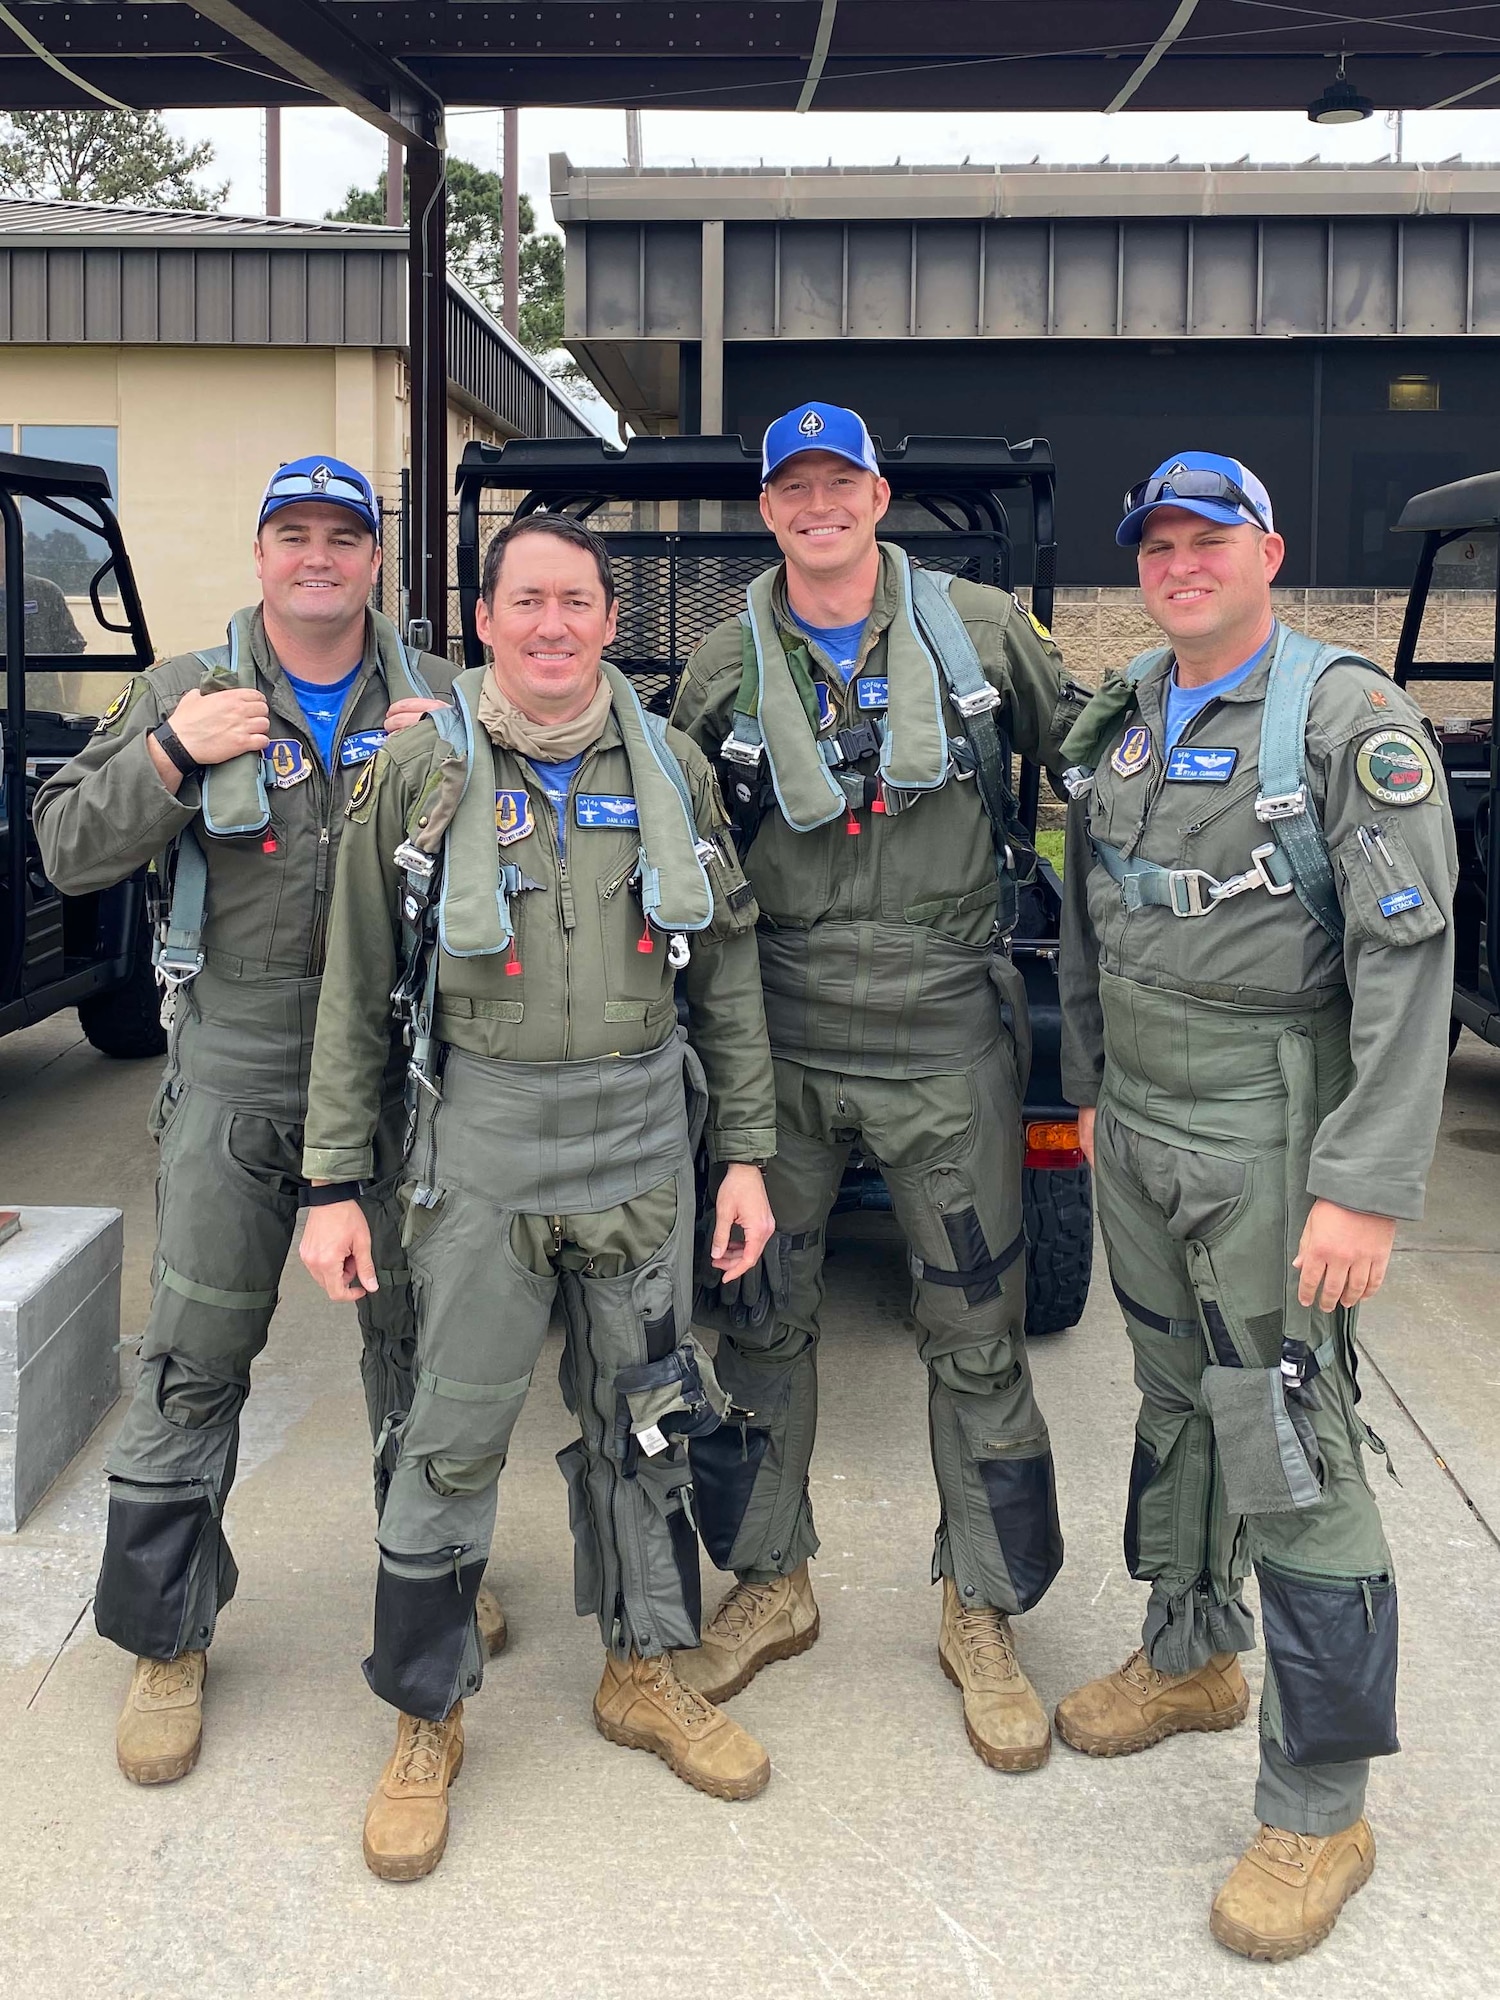 (Left to Right) Majors Robert Carpenter, Daniel Levy, James Buchanan, and Ryan Cummings, 47th Fighter Squadron pilots, pose for a photo before stepping to their A-10 Thunderbolt IIs during the Hawgsmoke 2021 competition at Moody Air Force Base, Ga., April 13-17, 2021. The competition consisted of A-10 Thunderbolt II four-ship teams from around the world fighting to be considered the ‘Best of the Best’ in ground attack and target destruction. These pilots brought home 2nd place overall. The 47th FS, a flying squadron in the 924th Fighter Group at Davis-Monthan Air Force Base, Arizona, is a Geographically Separated Unit of the 944th Fighter Wing.